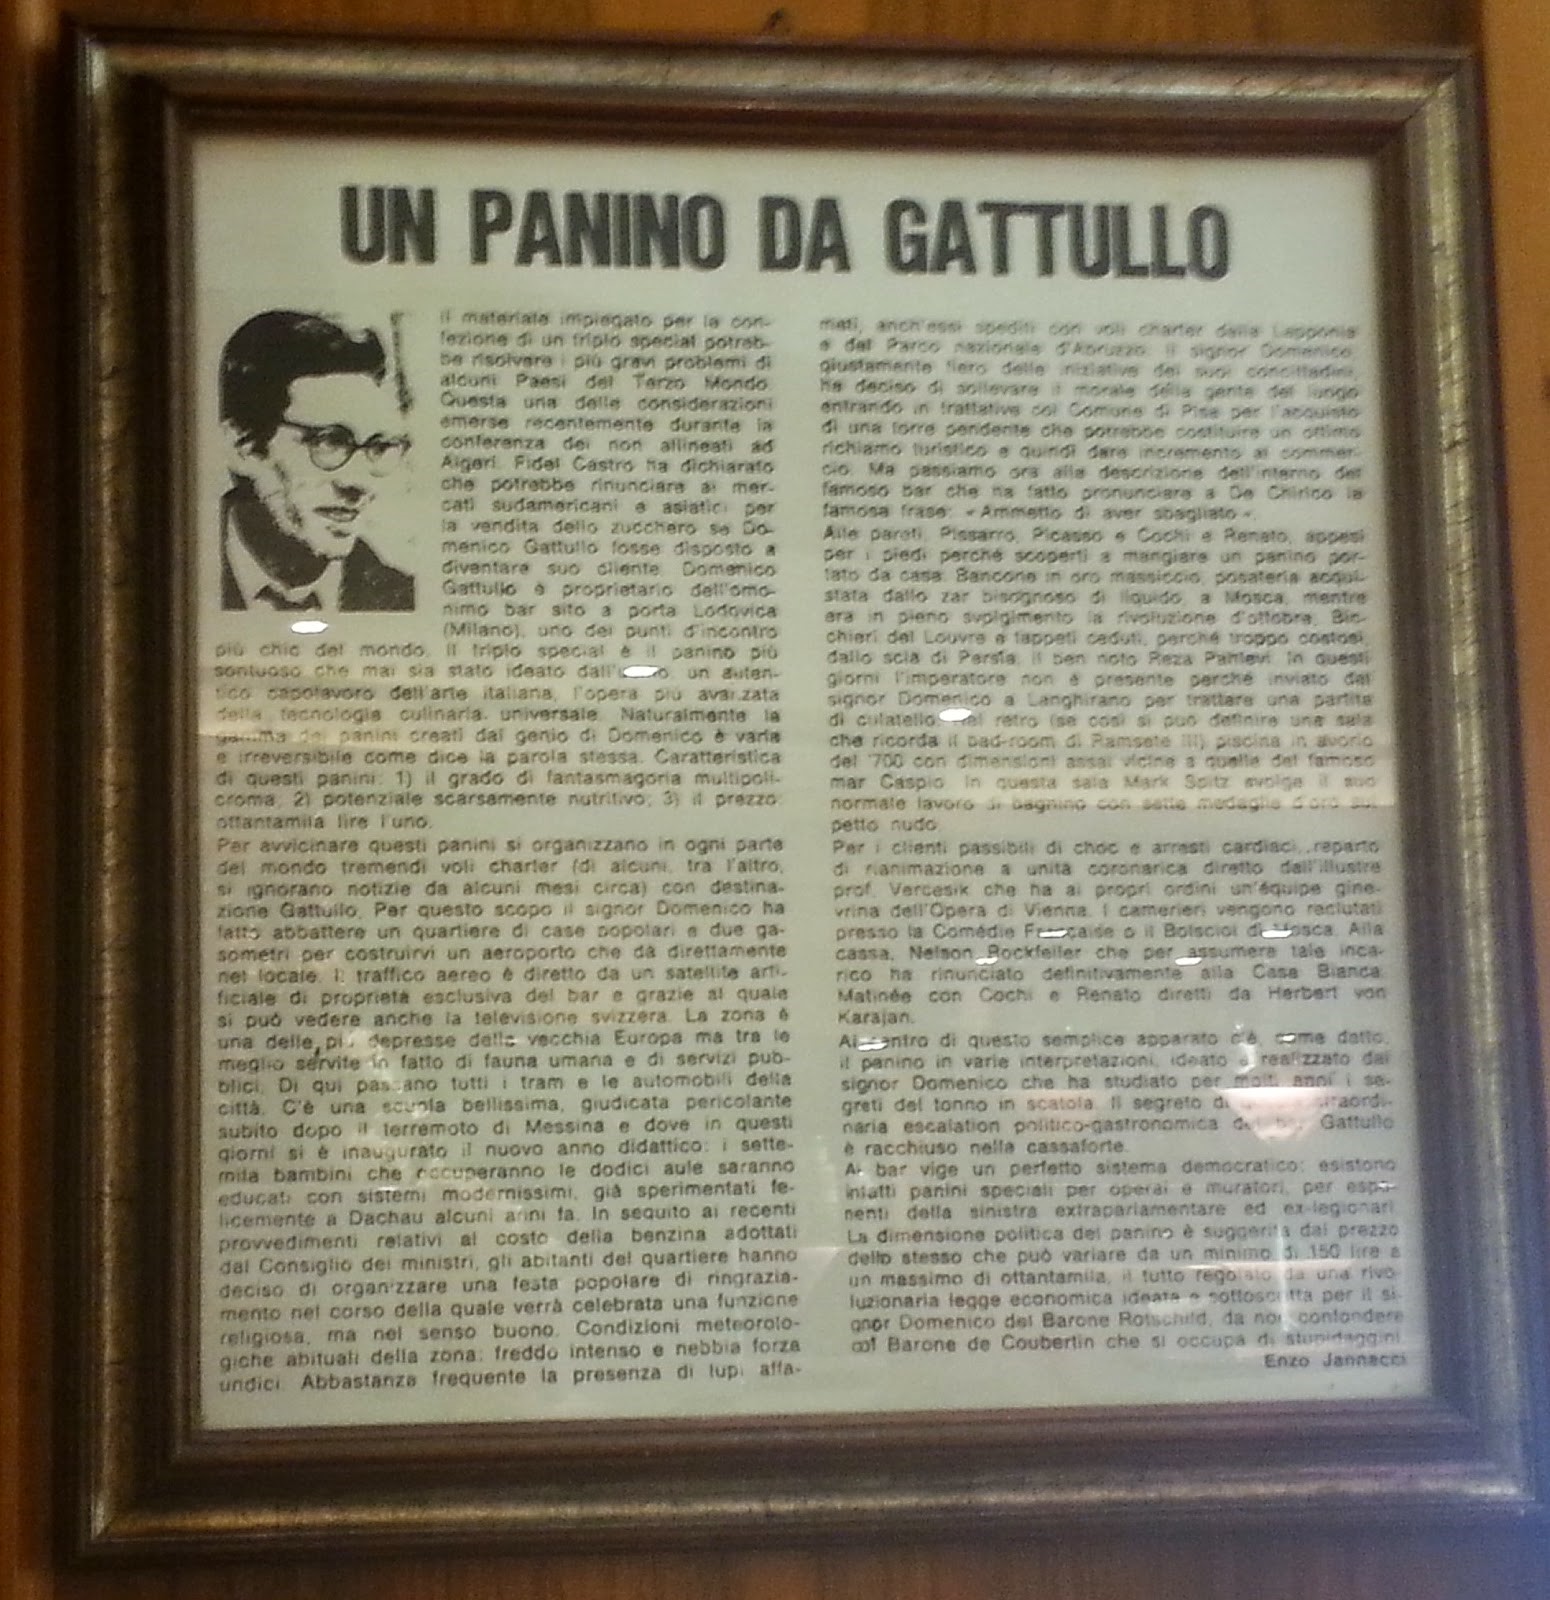 A painting hanging in the Gattullo bar with an article by Enzo Jannacci.